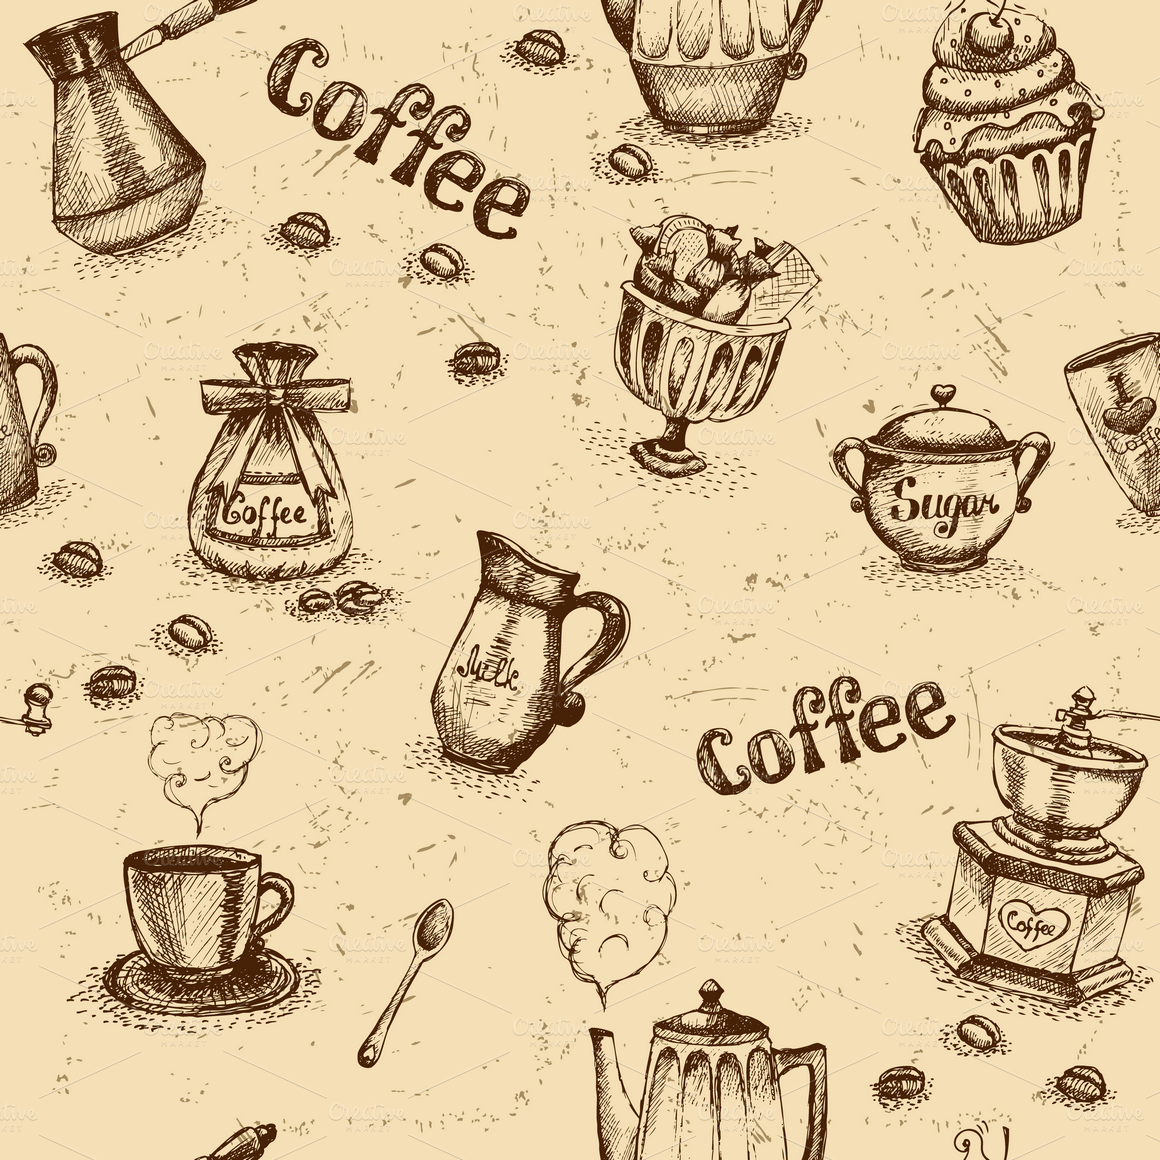 Pixels 1160x1160, The Aroma Of Coffee And Cinnamon, - Sketch - HD Wallpaper 